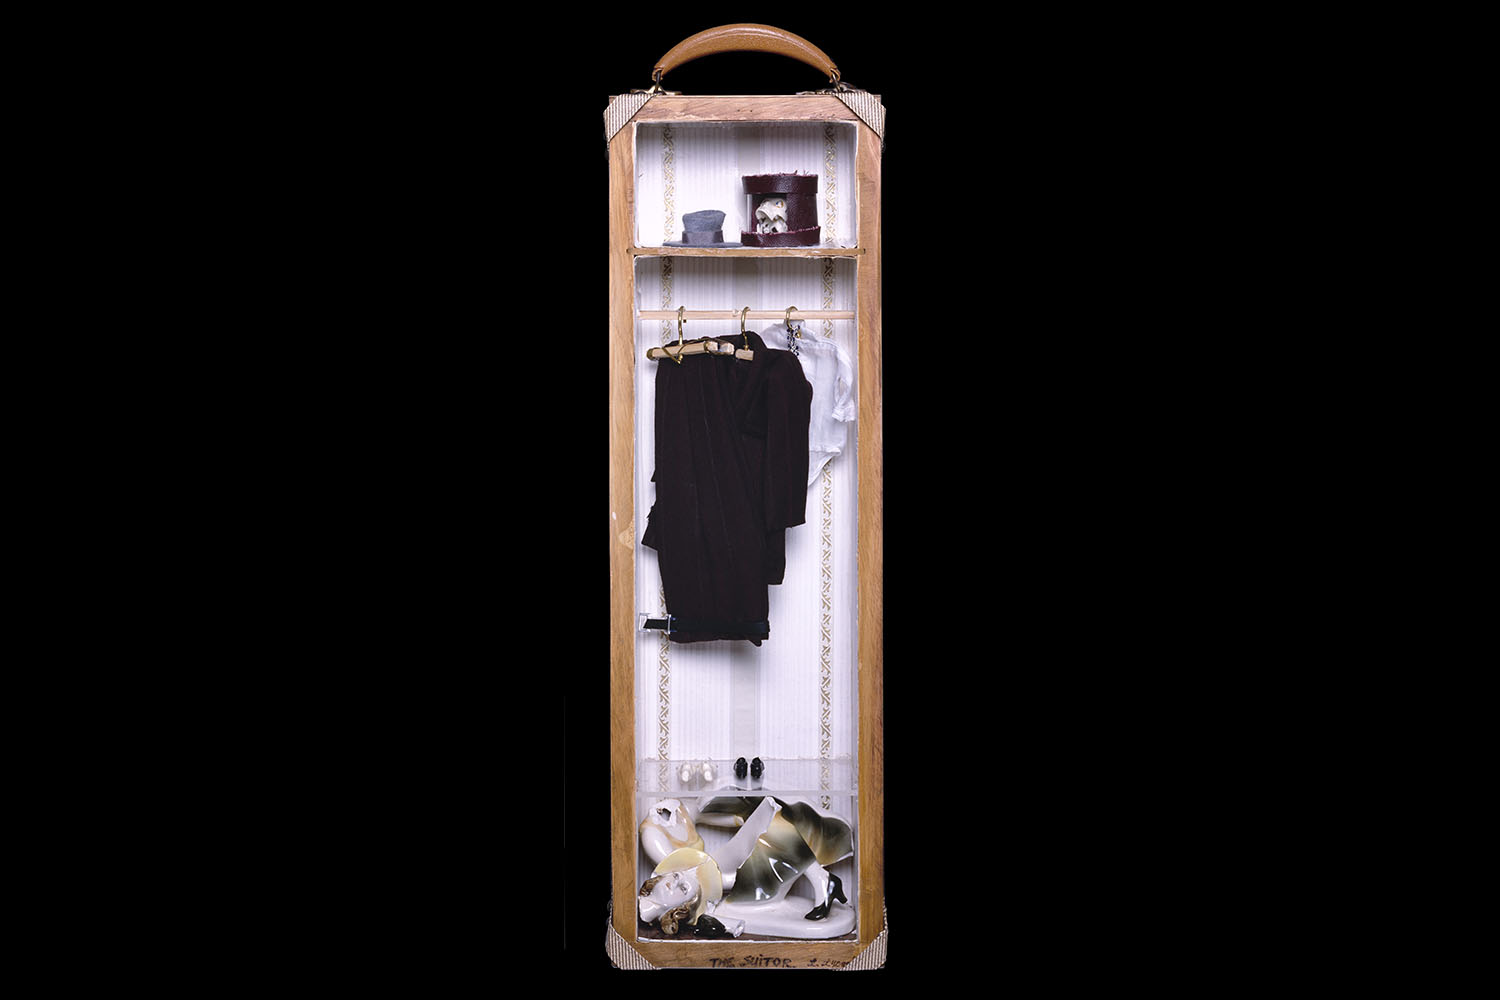 Narrow open half of a suitcase that resembles a wardrobe, inside containing a broken statue of a woman, clothes hanging, and a skull in a hat box